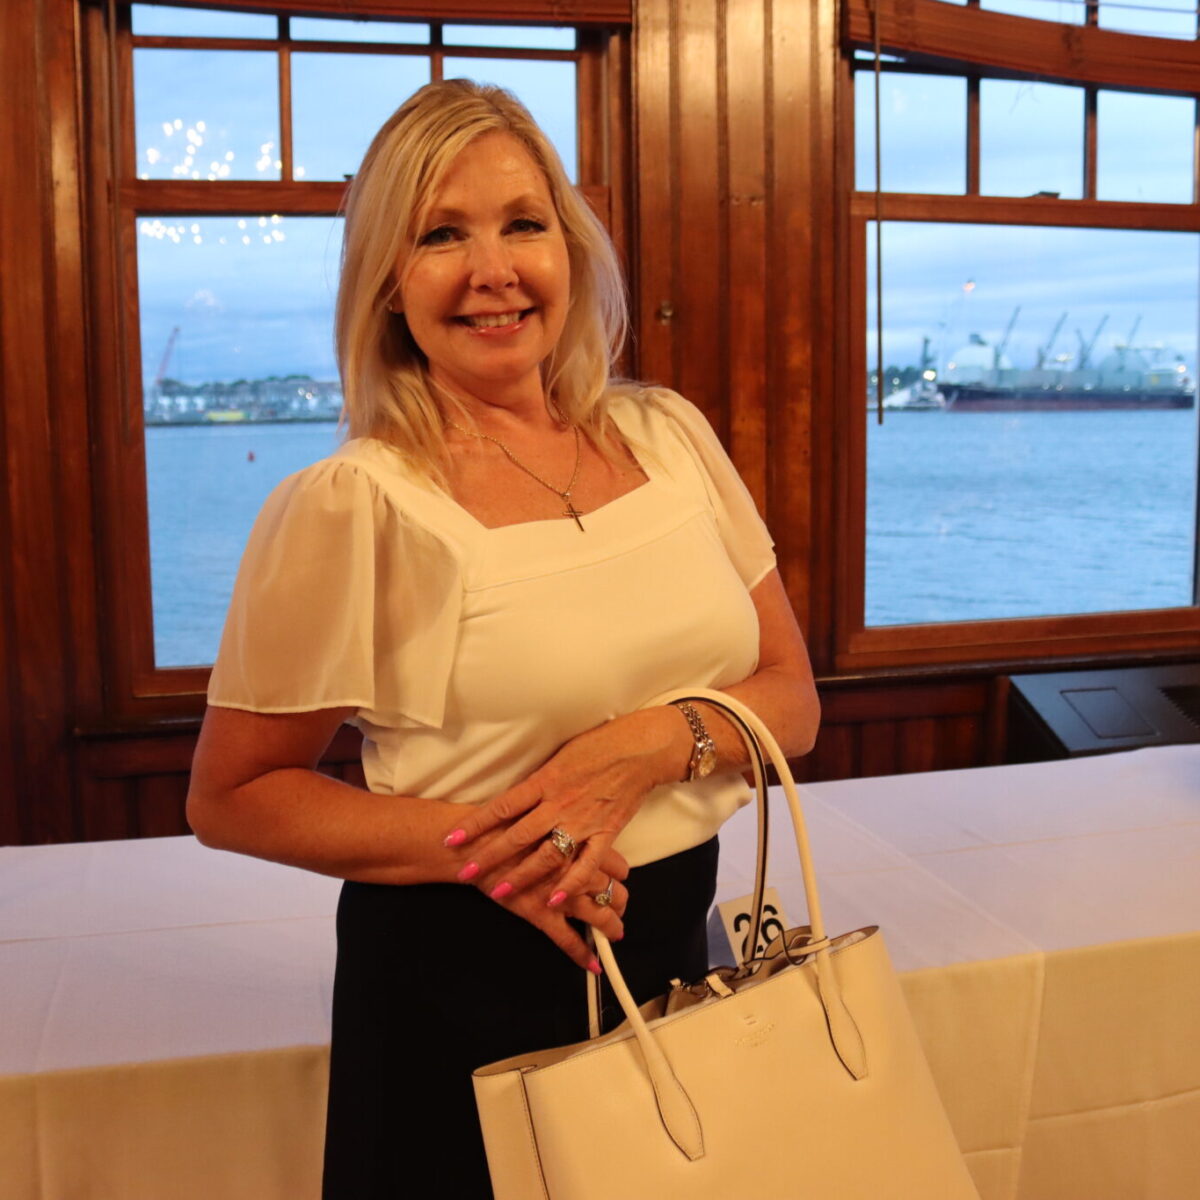 An attendee poses with a purse.